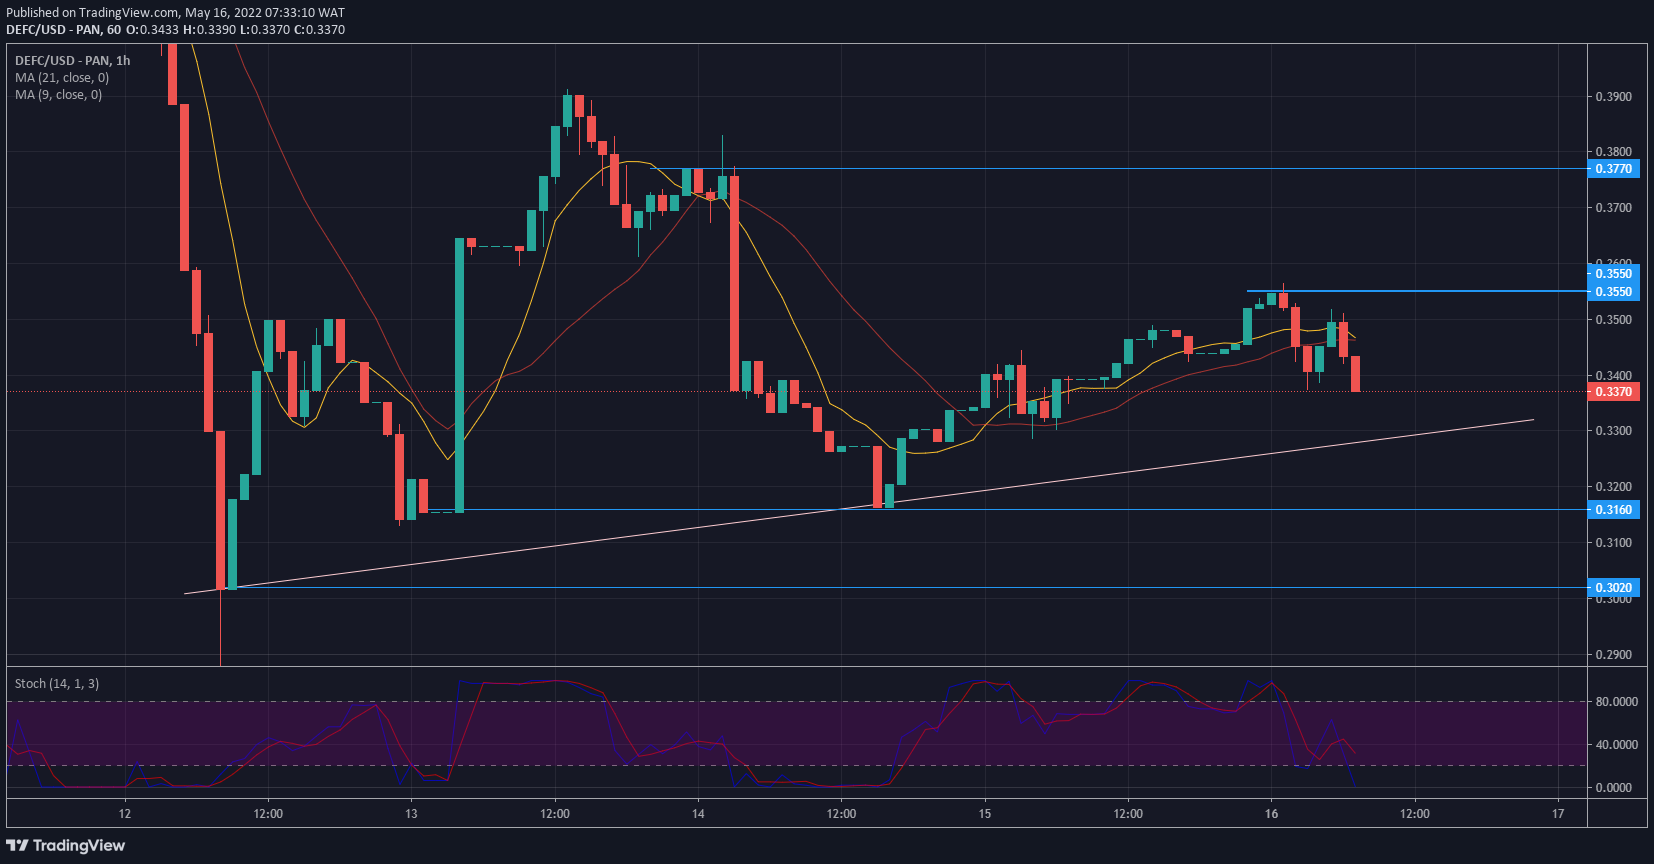 DeFI Coin Price Forecast: DeFI coin uses a bullish trend line for support